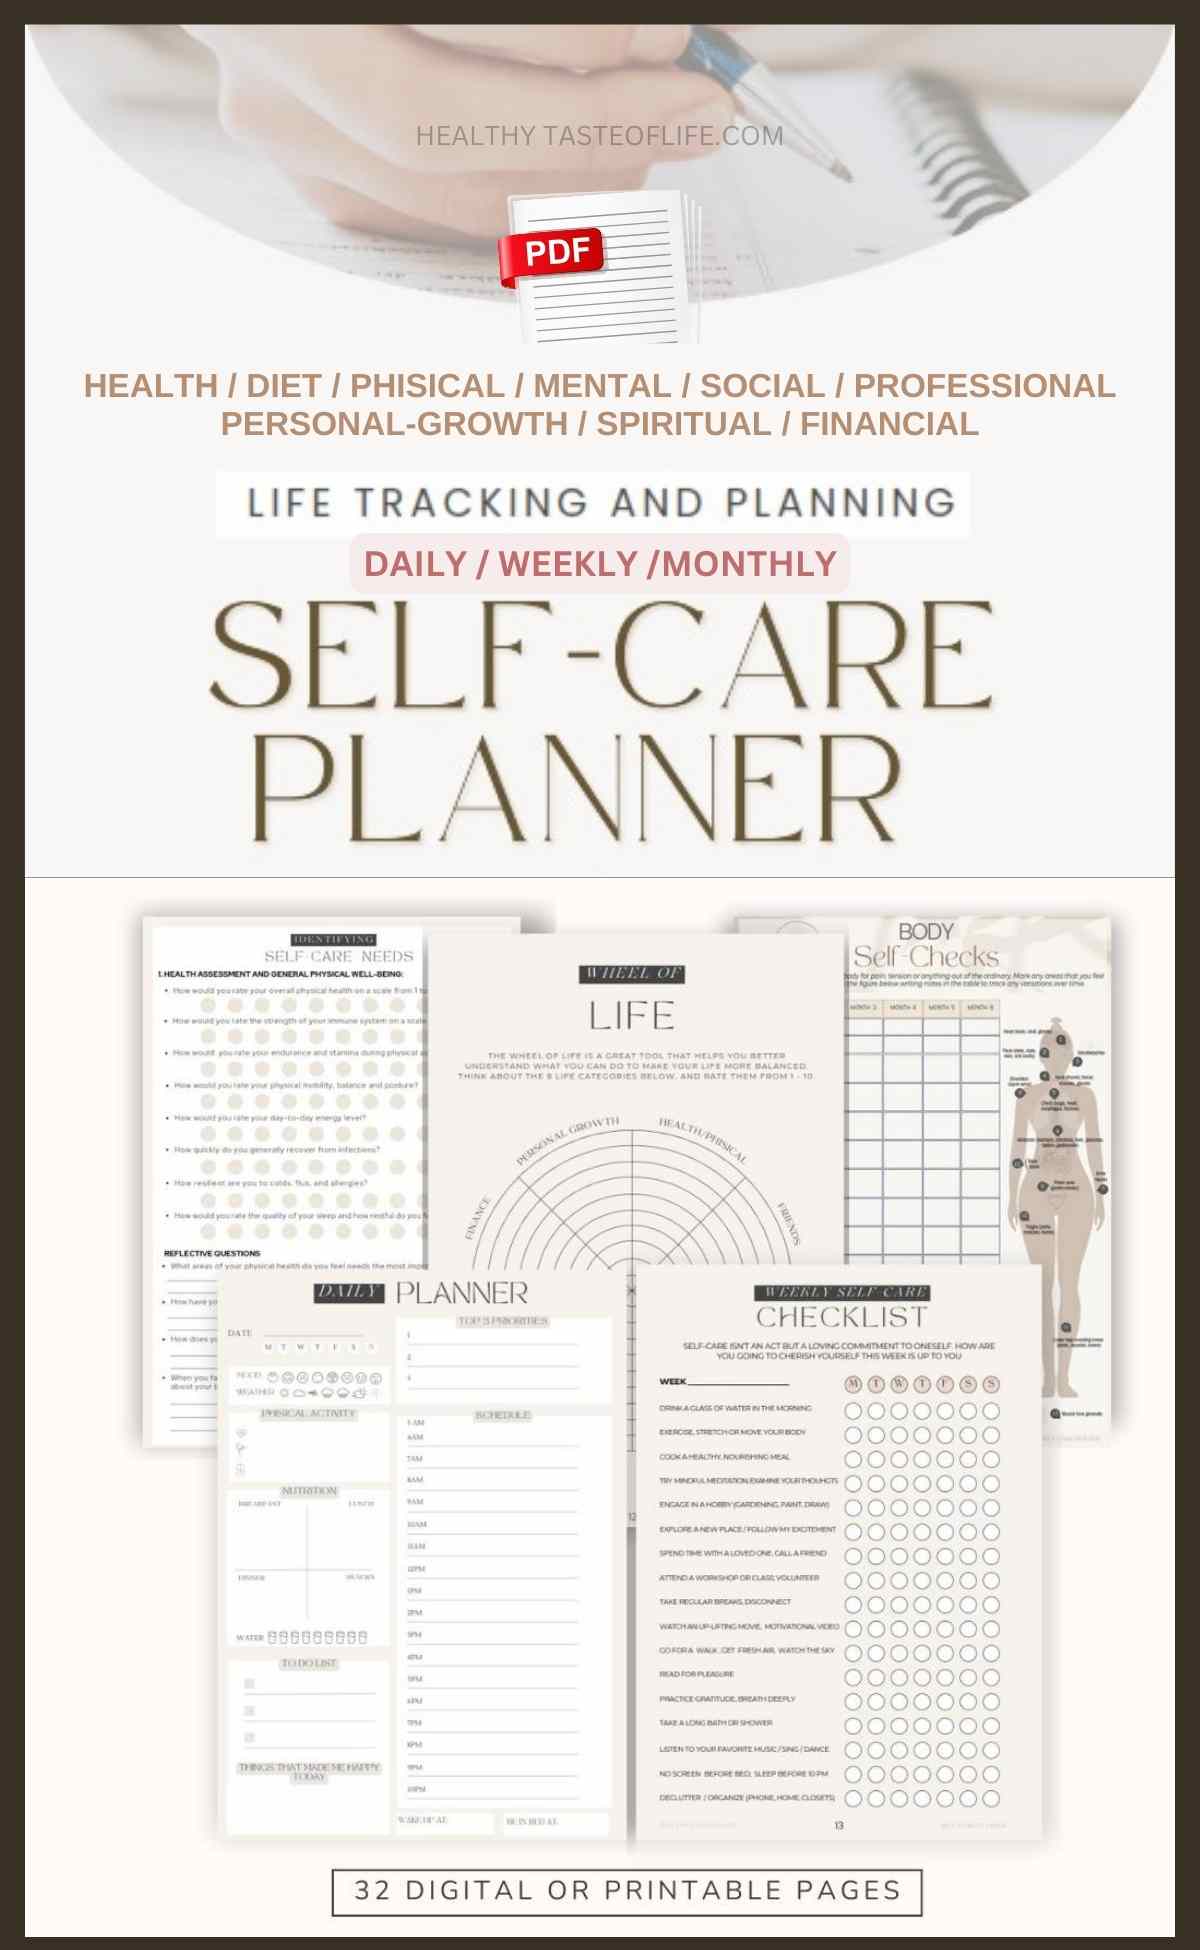 PDF Self-care planner (32 pages total) - instant download. This planner can be printed, or used as a digital self-care planner - in a note taking app. This self-care life planner (it's more like an all-in one journal) includes a holistic approach, covering physical, mental, emotional, personal development, spiritual, professional, financial and social goal setting and tracking. Includes checklists with self-care activities, planners, reflective questions, tracking tables, and detailed self-care review / overview on daily, weekly and monthly basis. 